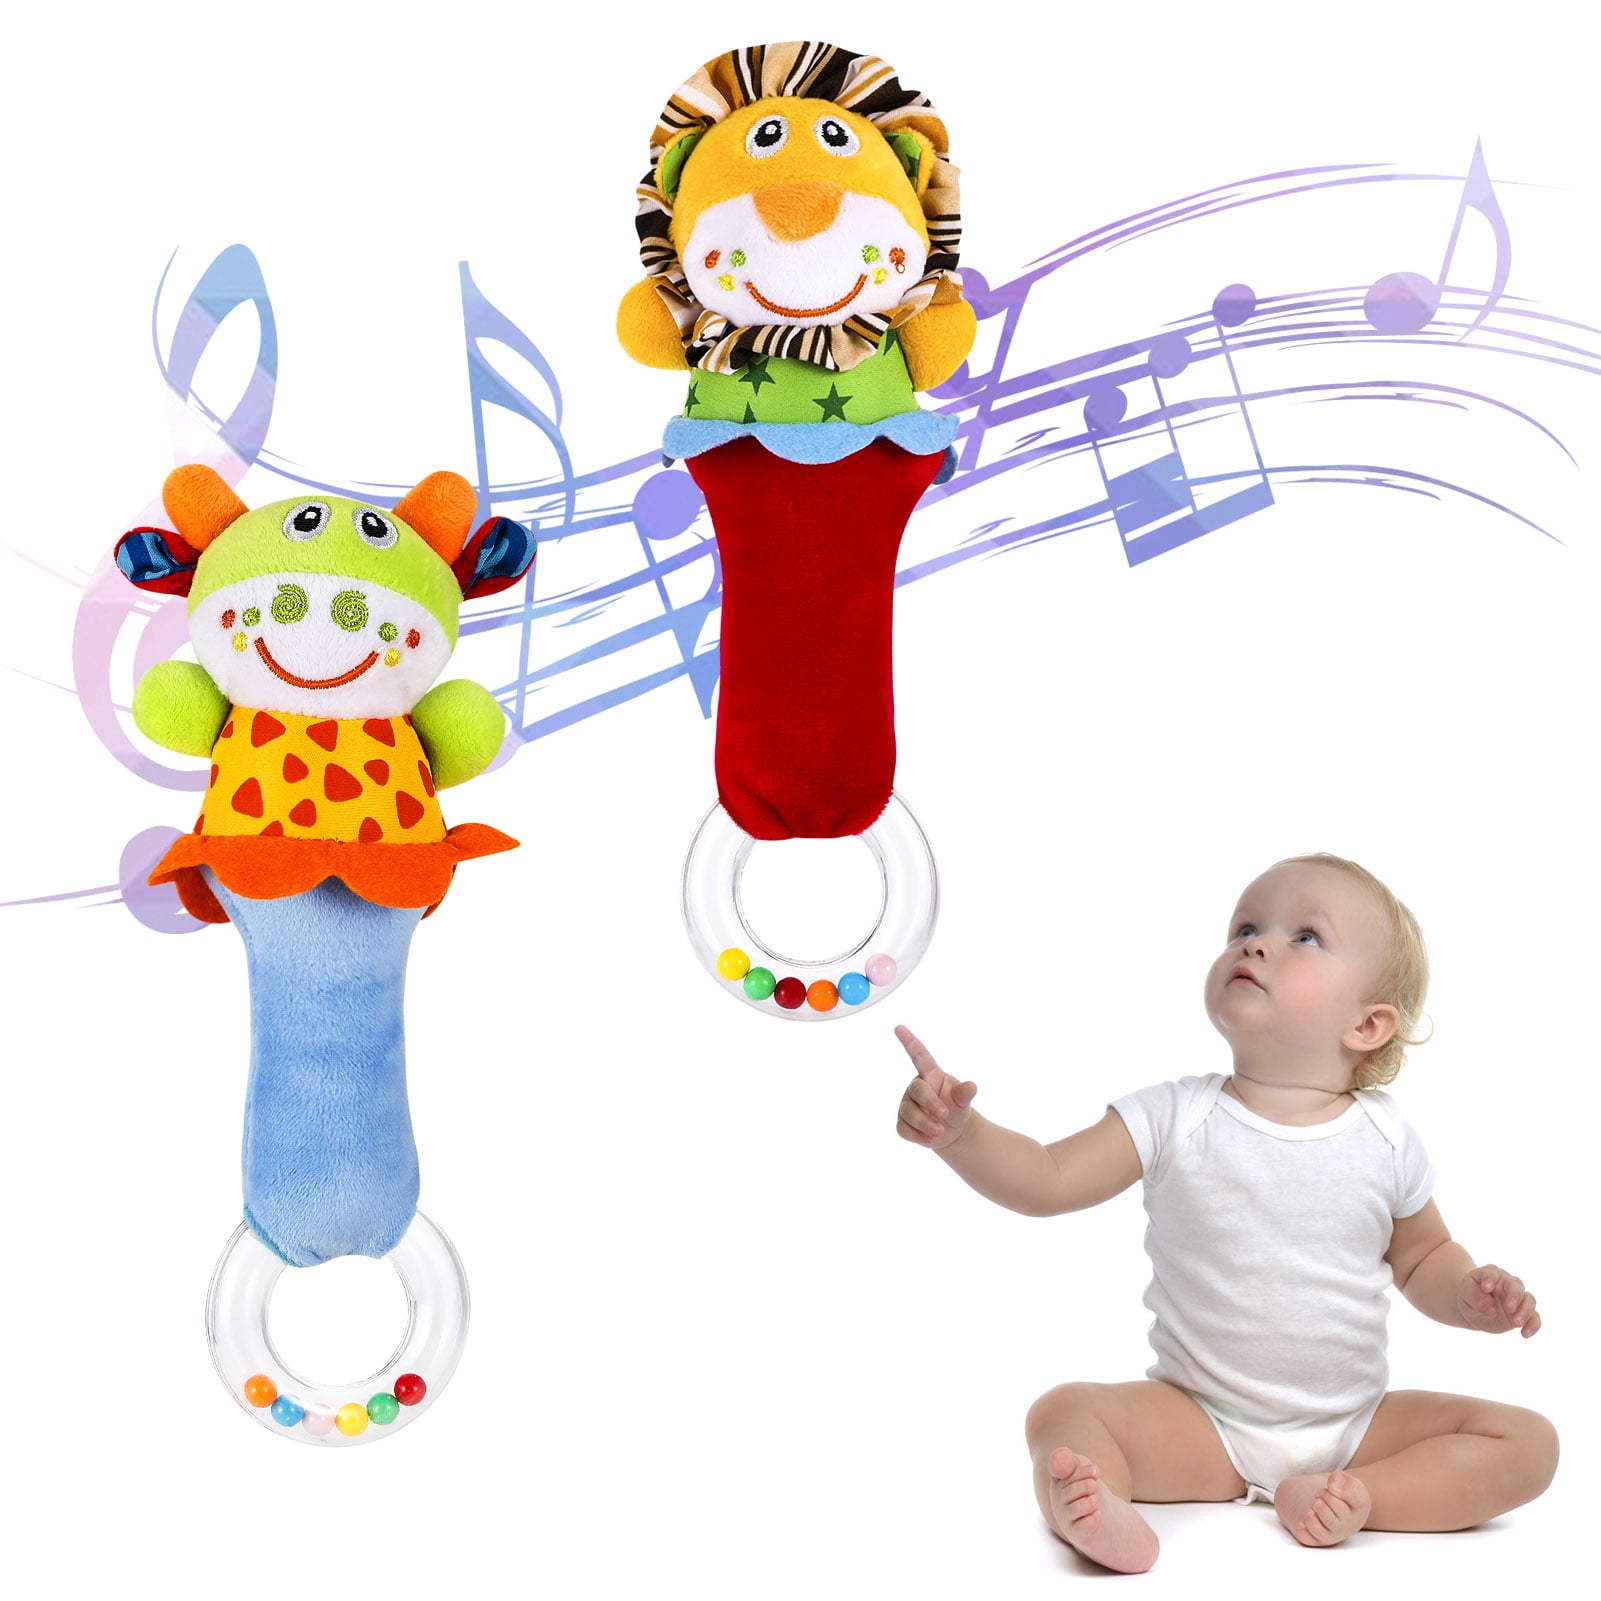 0-2 Yrs Old Wri Rattles Caoon Animal Pattern Rattle Wri Bands Toy for 02 Yrs Old Baby Newborn Infant Girl Boys Oyunngs 【 】 Soft Baby Socks Toys 